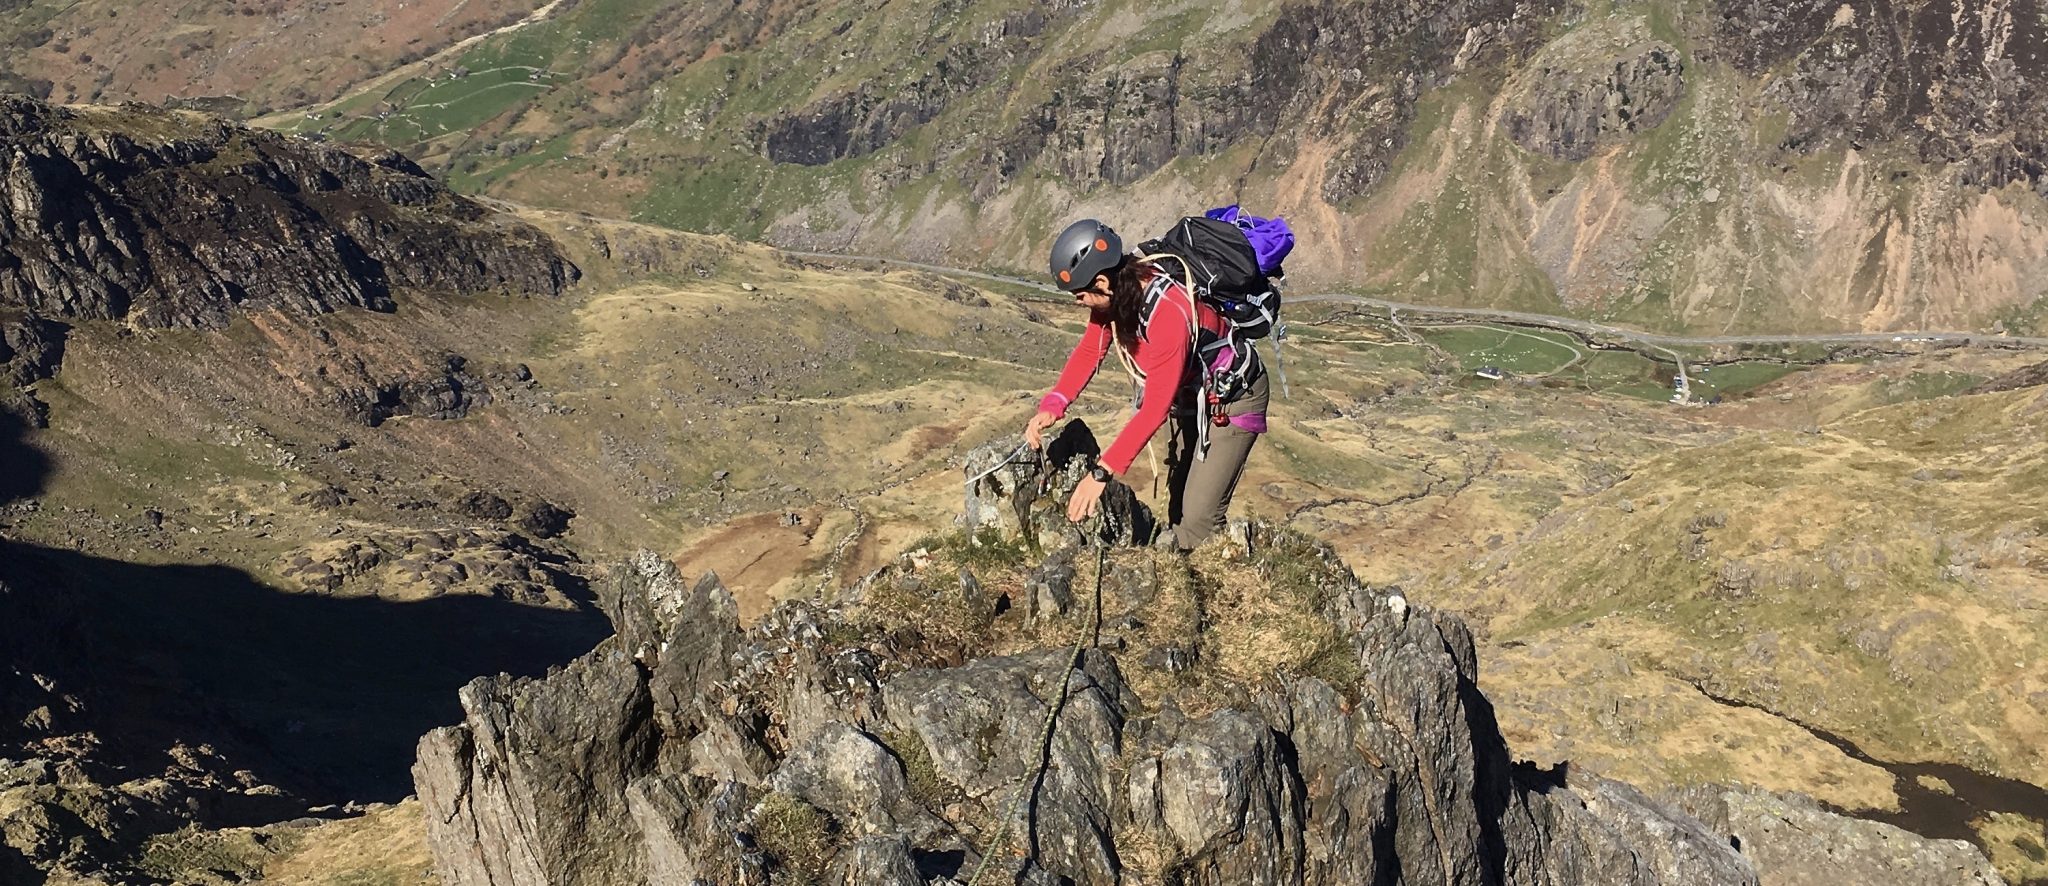 A mountaineer reaches the crest of the ridge of the Clogwyn y Person Arete with Llanberis Pass below during a summer mountaineering course in Snowdonia